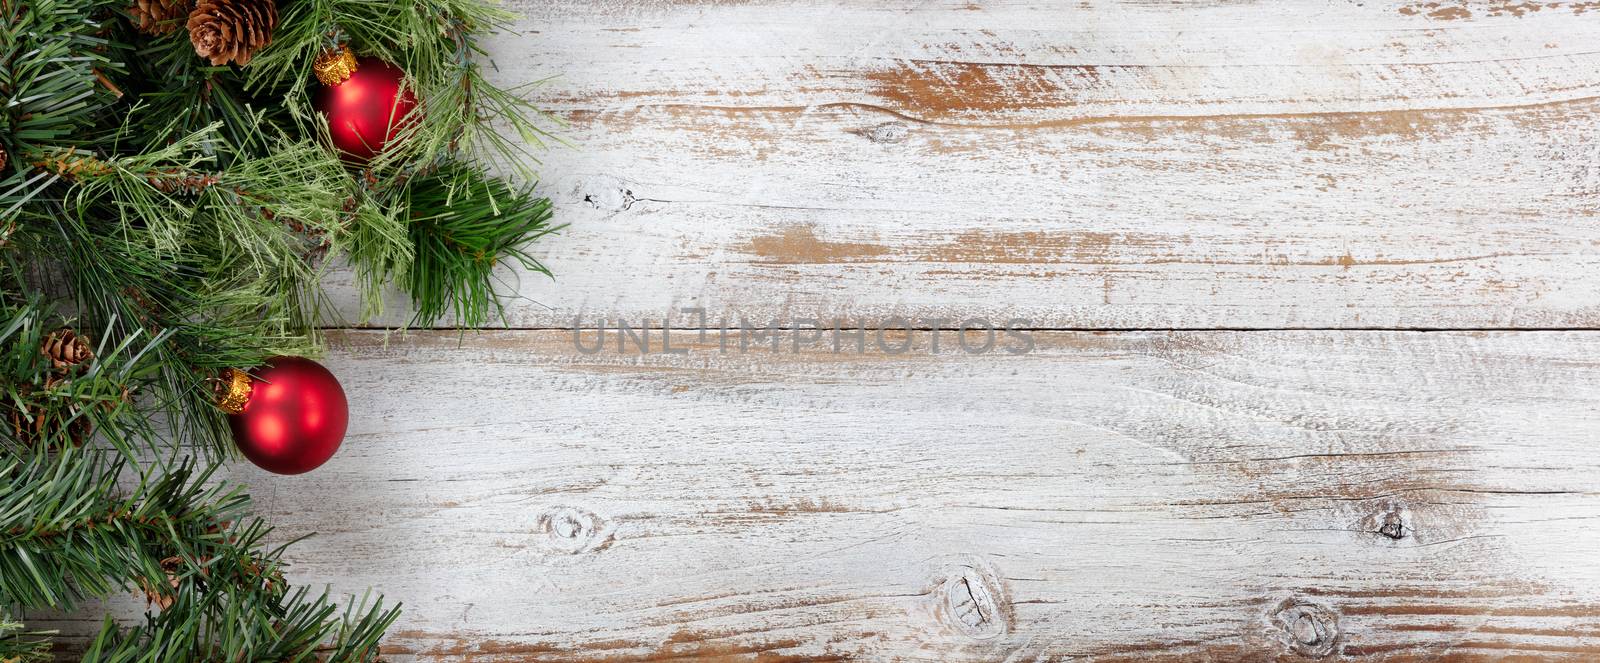 Rough fir branches with Christmas ball ornaments on rustic white wooden boards 